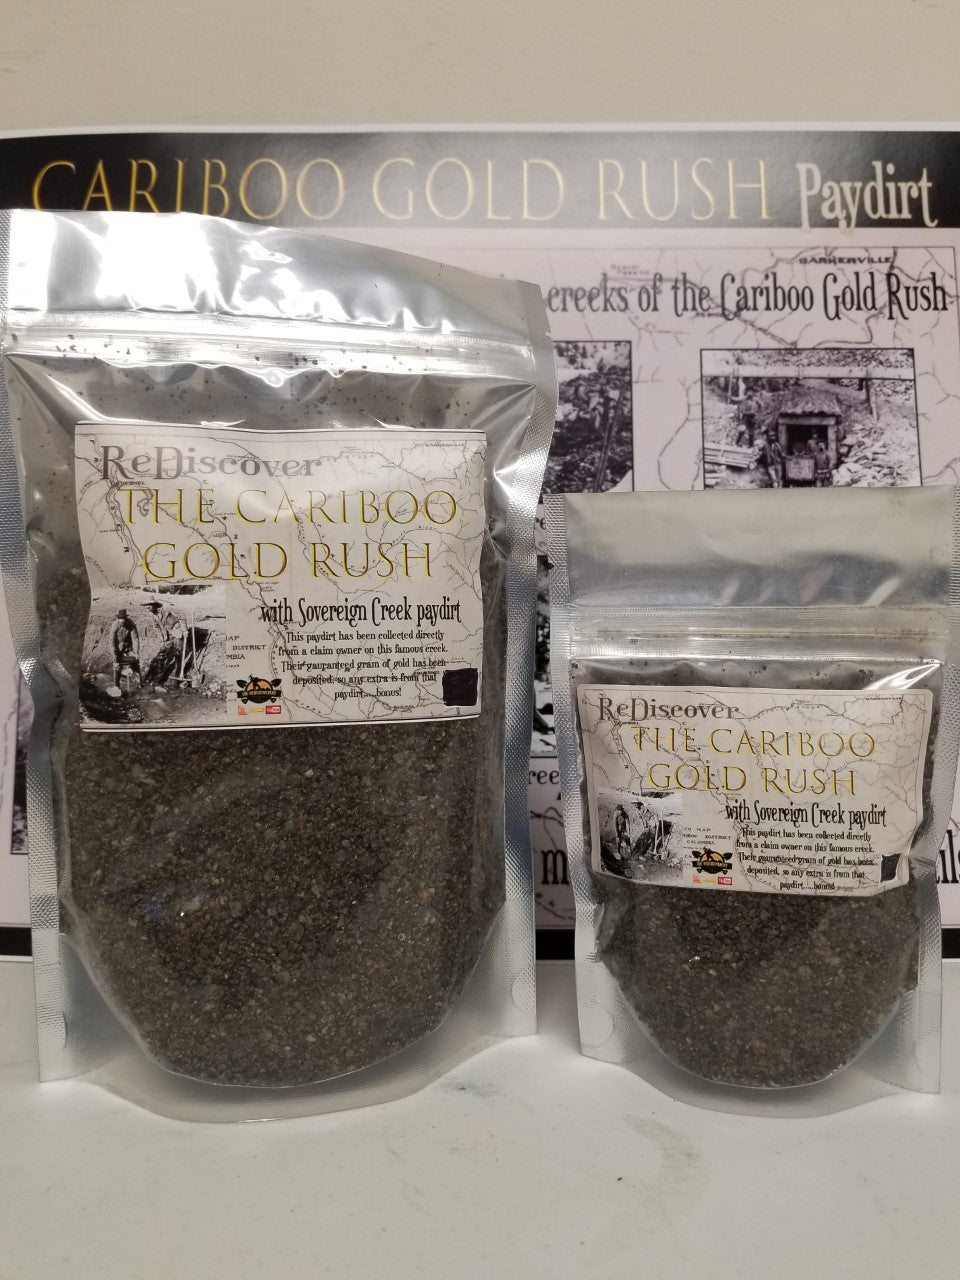 The ReDiscoverers - ReDiscover The Cariboo Gold Rush - Sovereign Creek Paydirt 2lb Bag